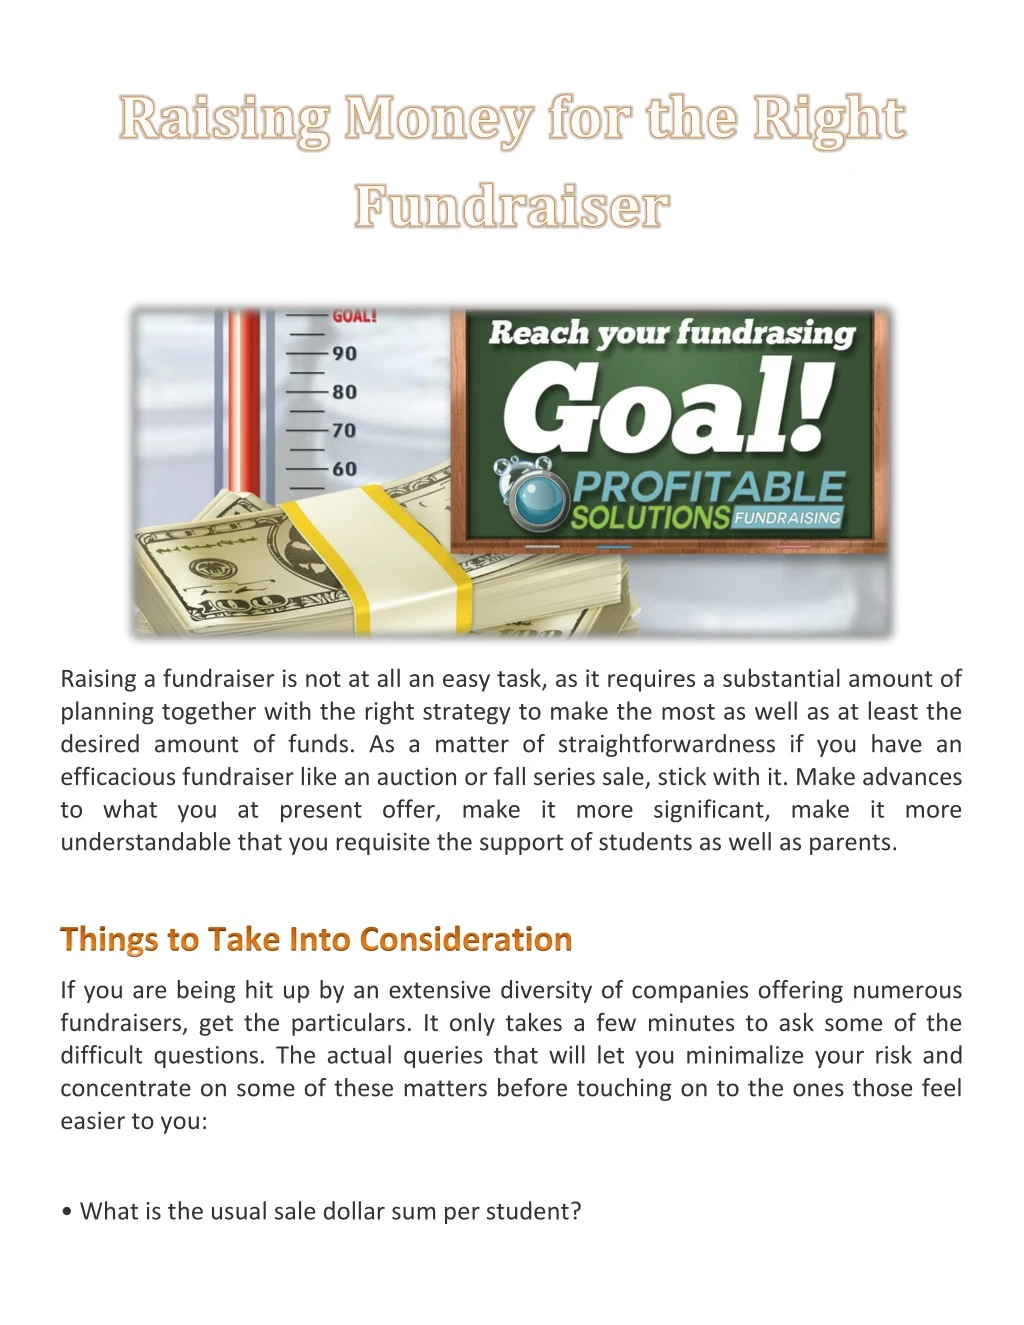 raising a fundraiser is not at all an easy task